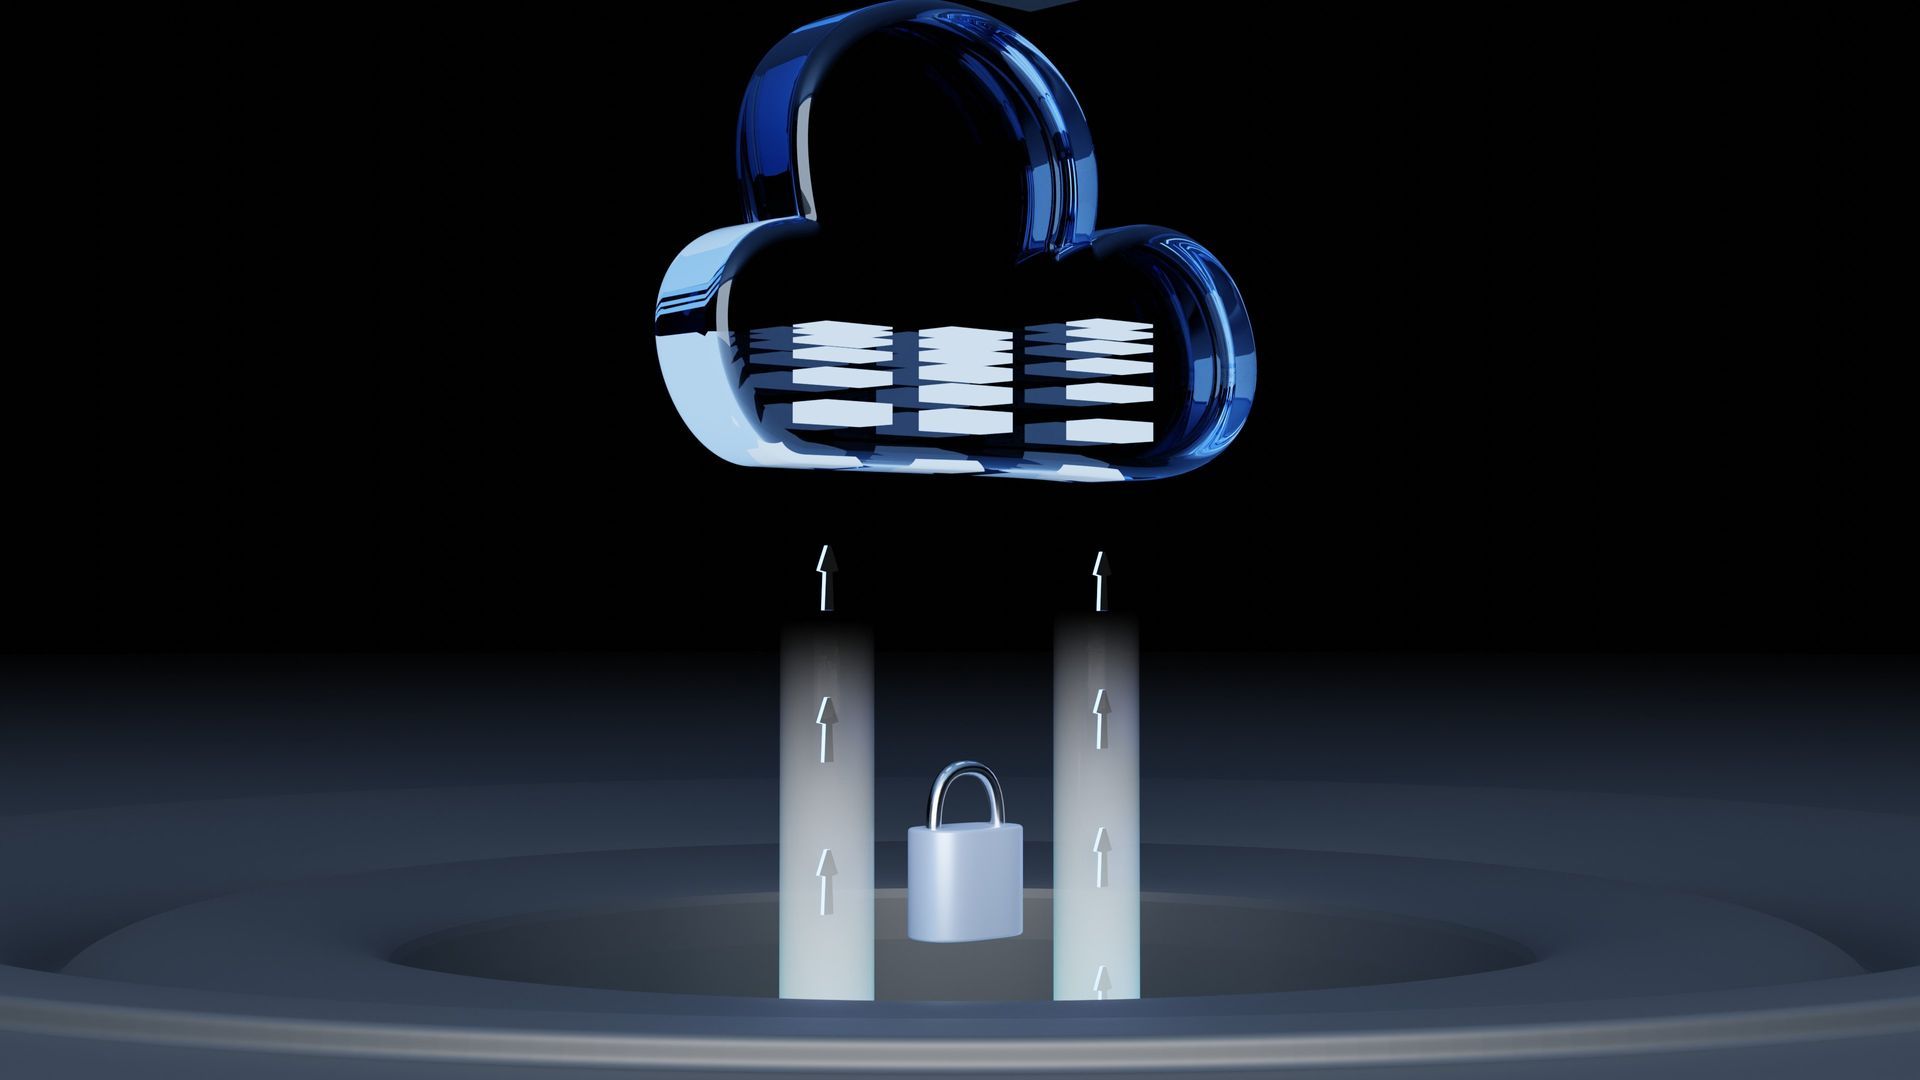 3D rendering of a cloud with a padlock attached to it